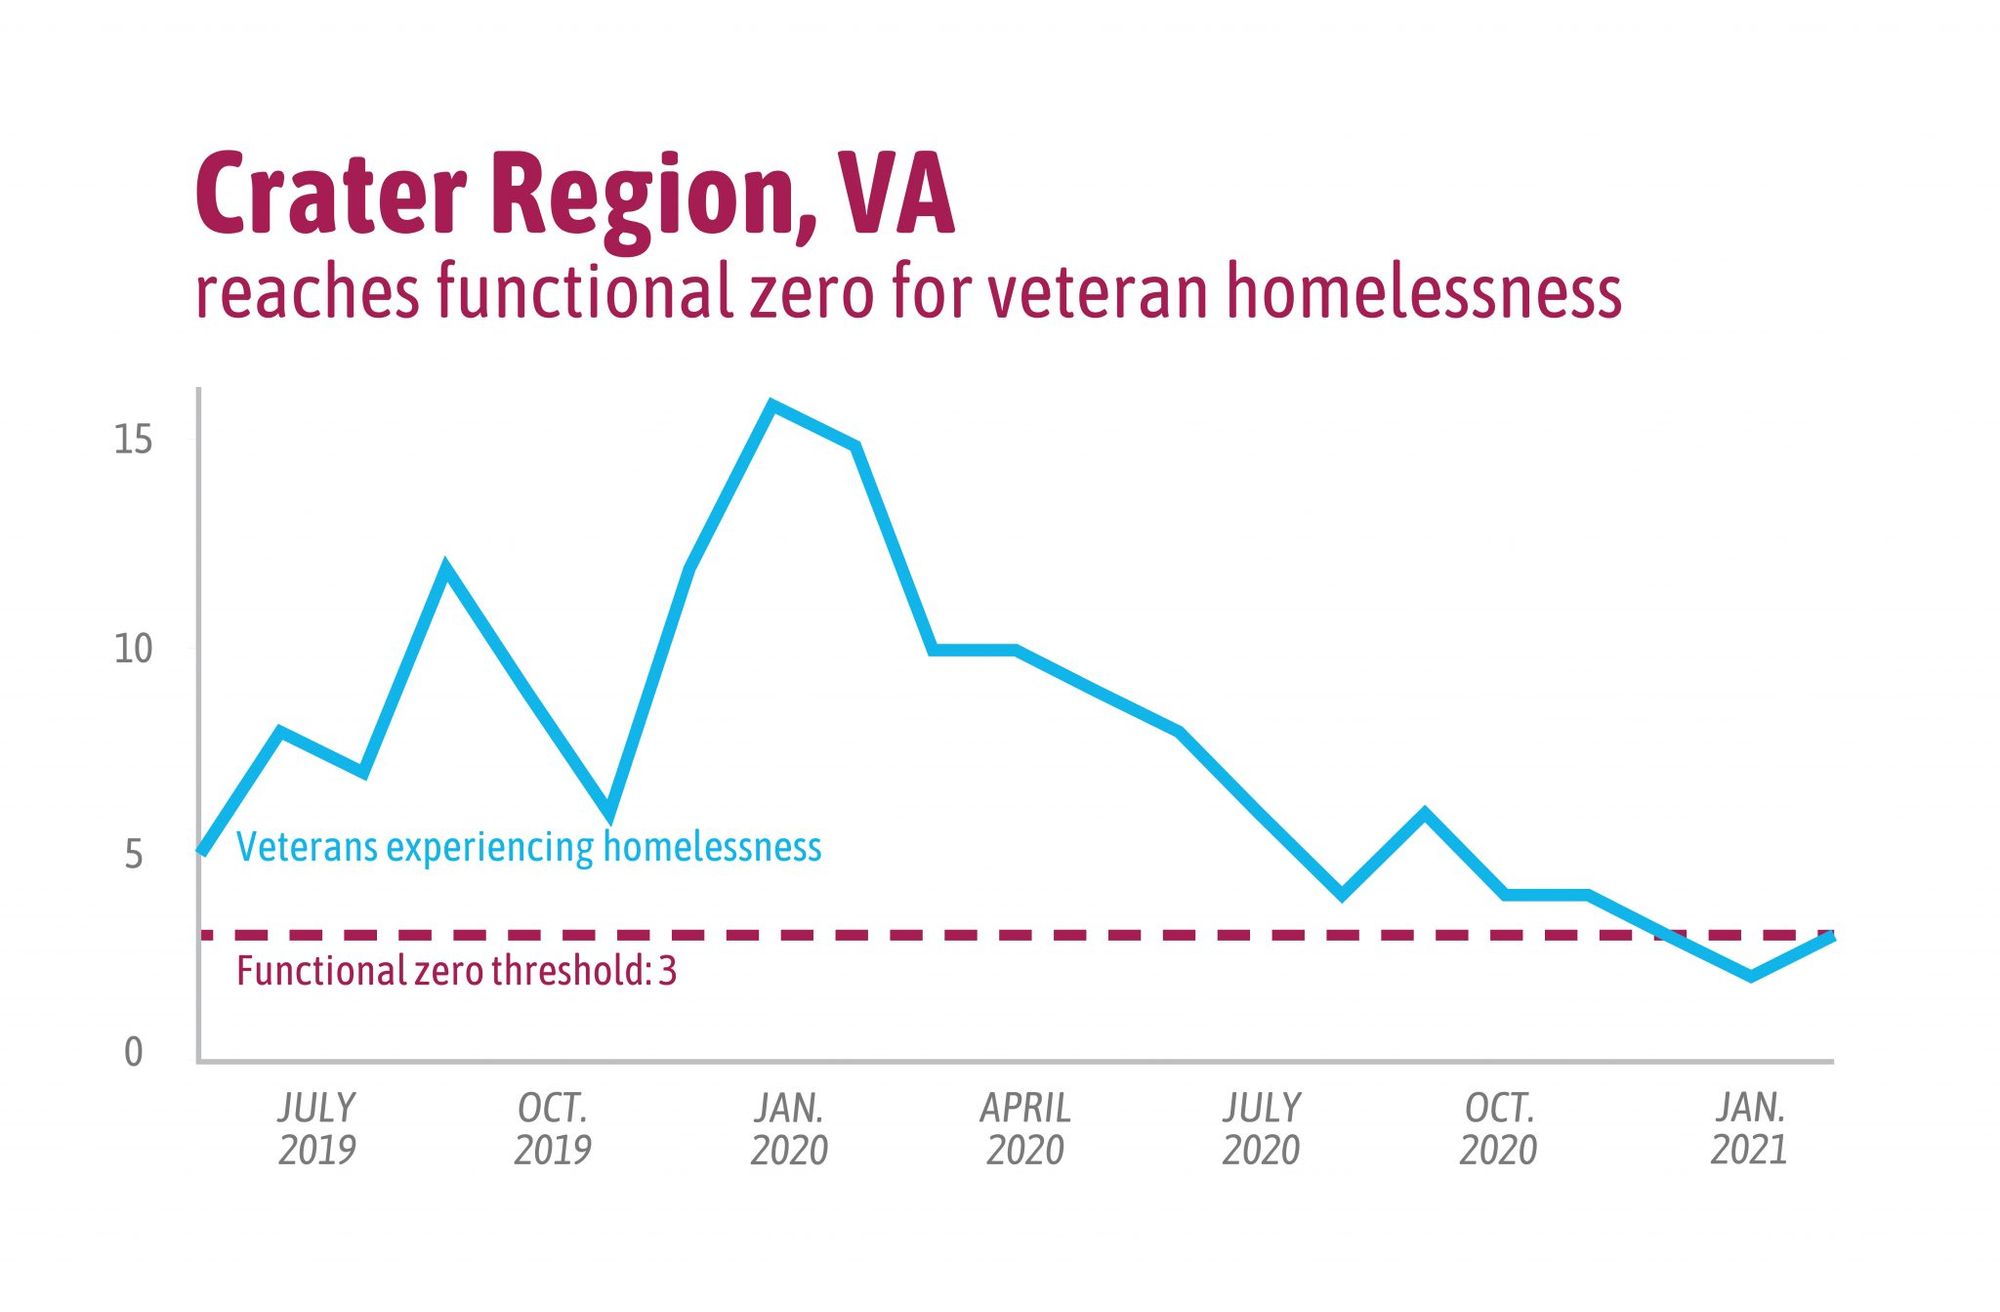 It's frustrating how close we could be to ending homelessness